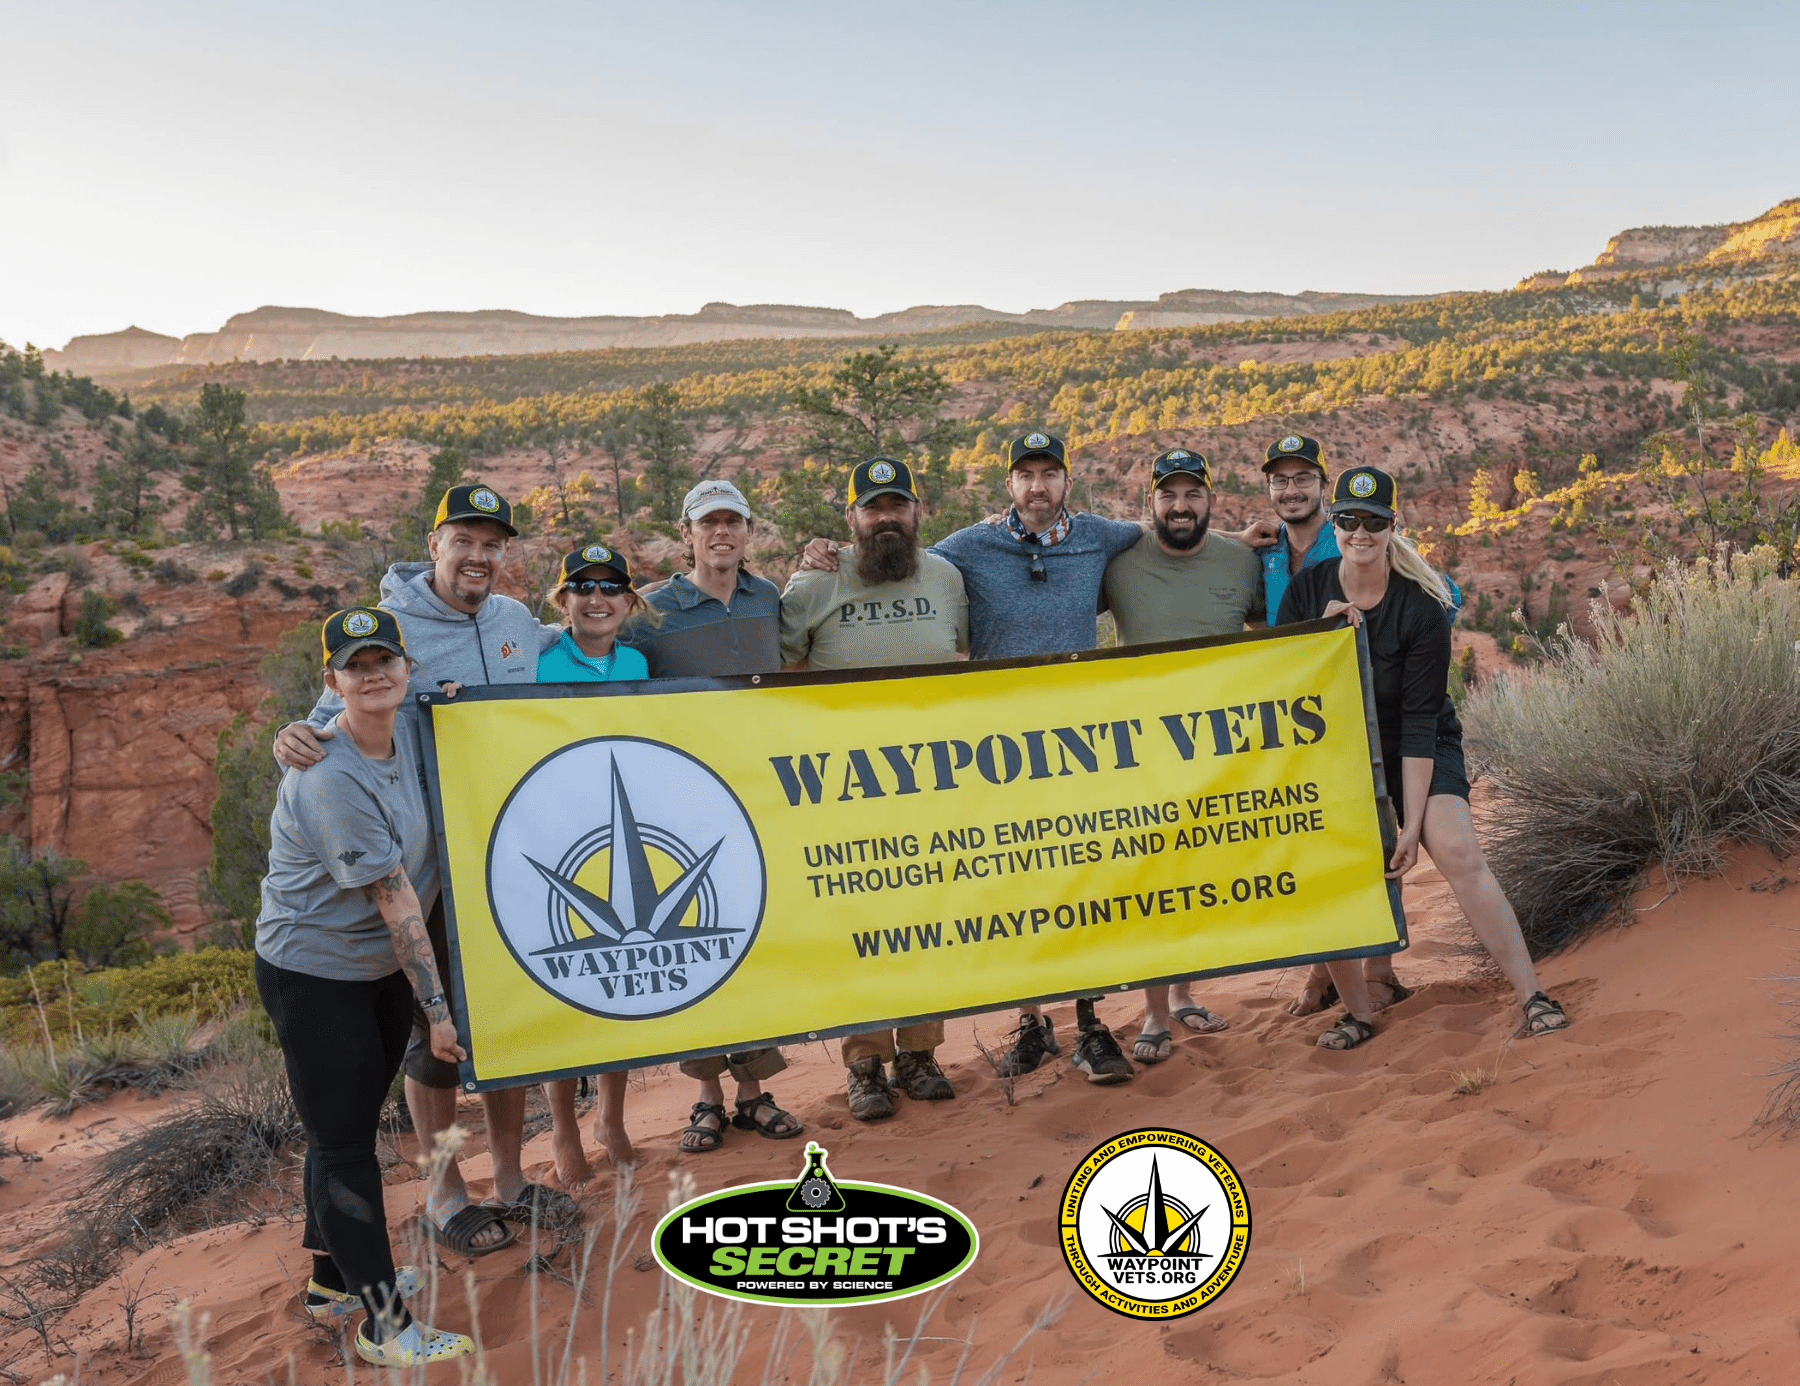 Hot Shot’s Secret to Match Donations to Waypoint Vets | THE SHOP